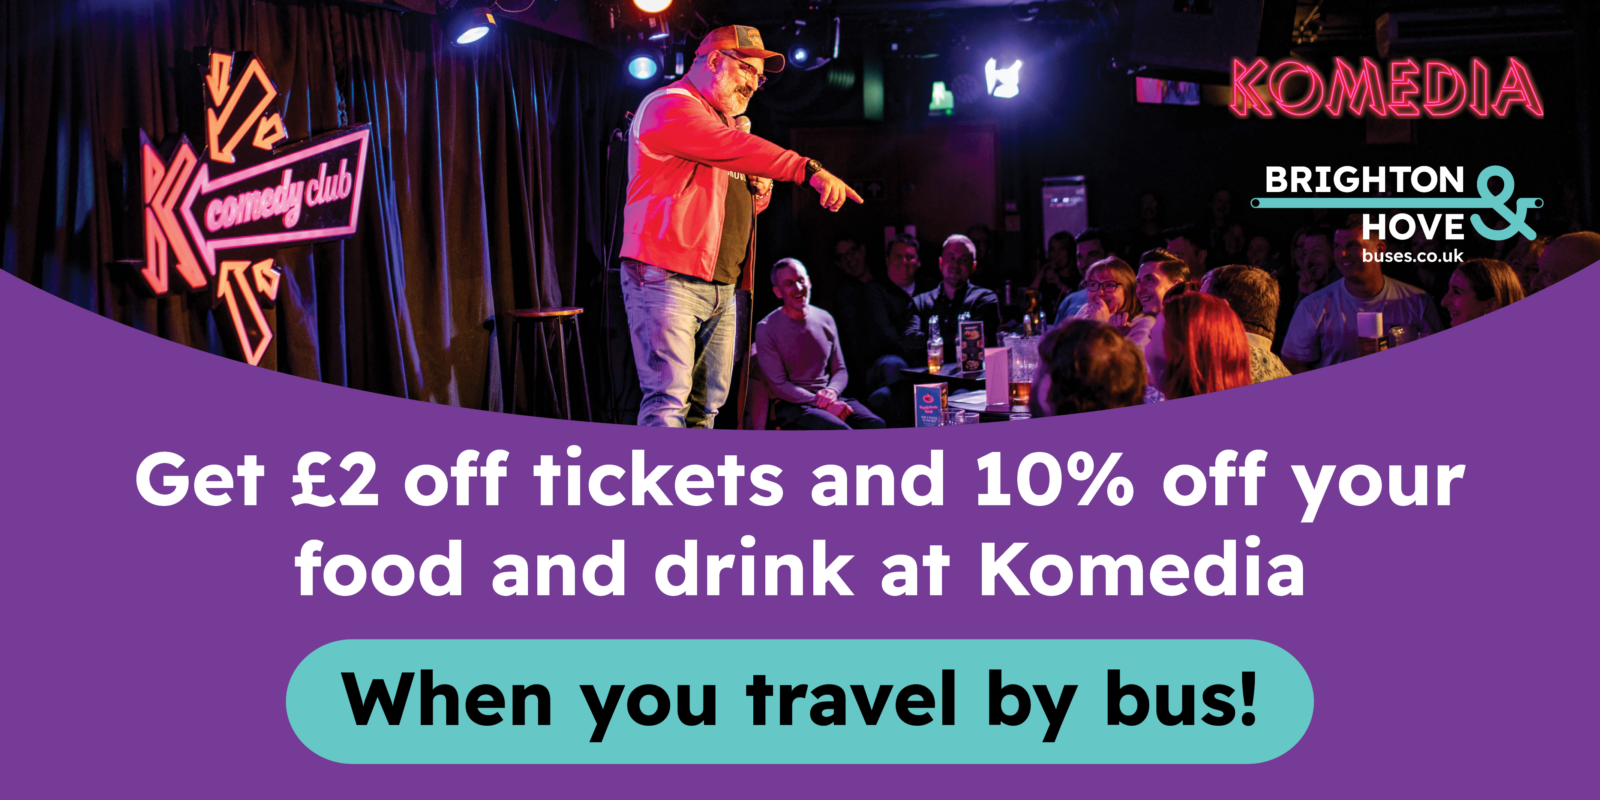 Travel by bus for discounted tickets at Komedia